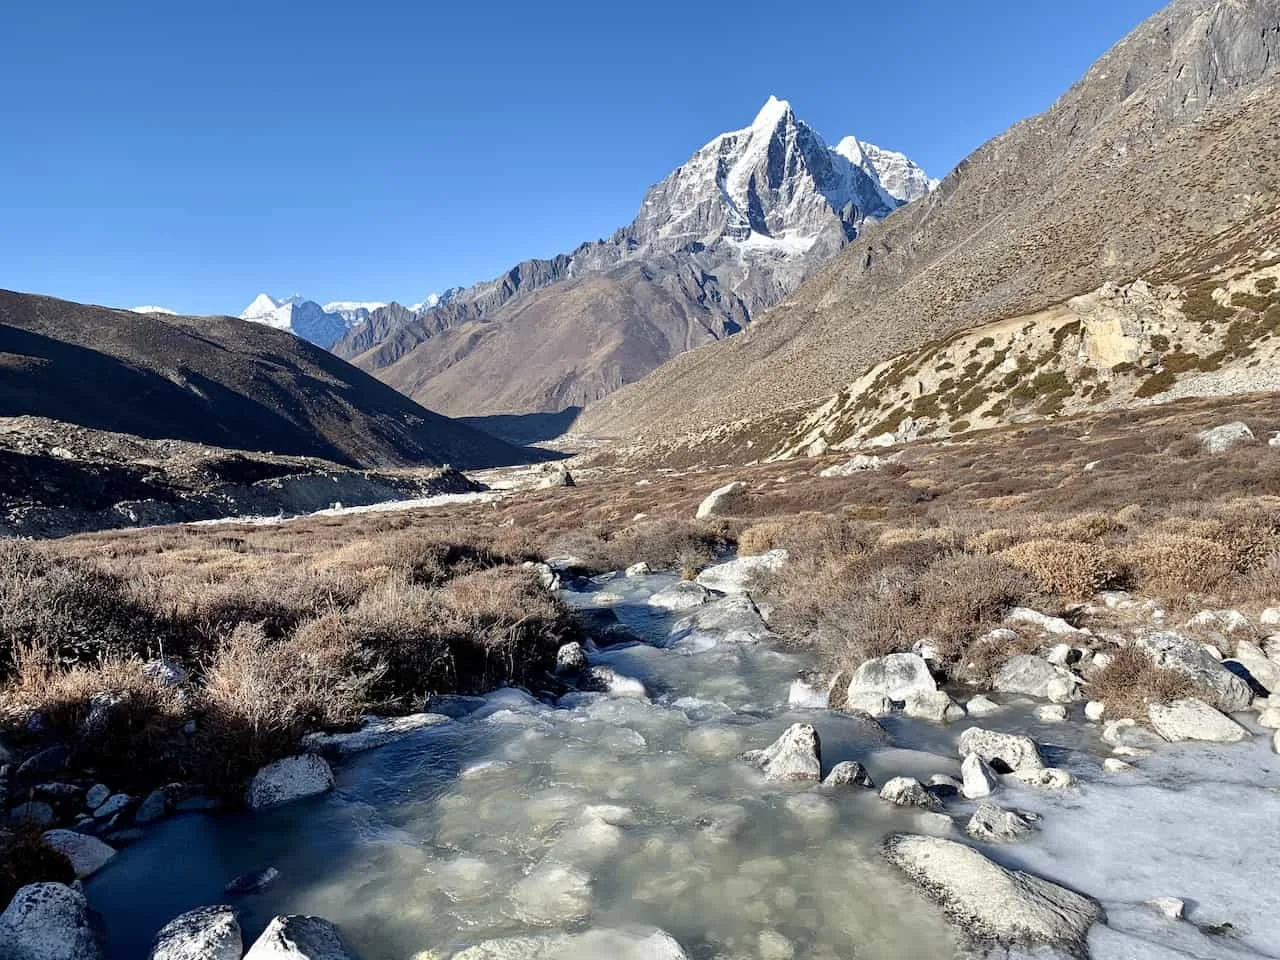 Dingboche to Chukhung River